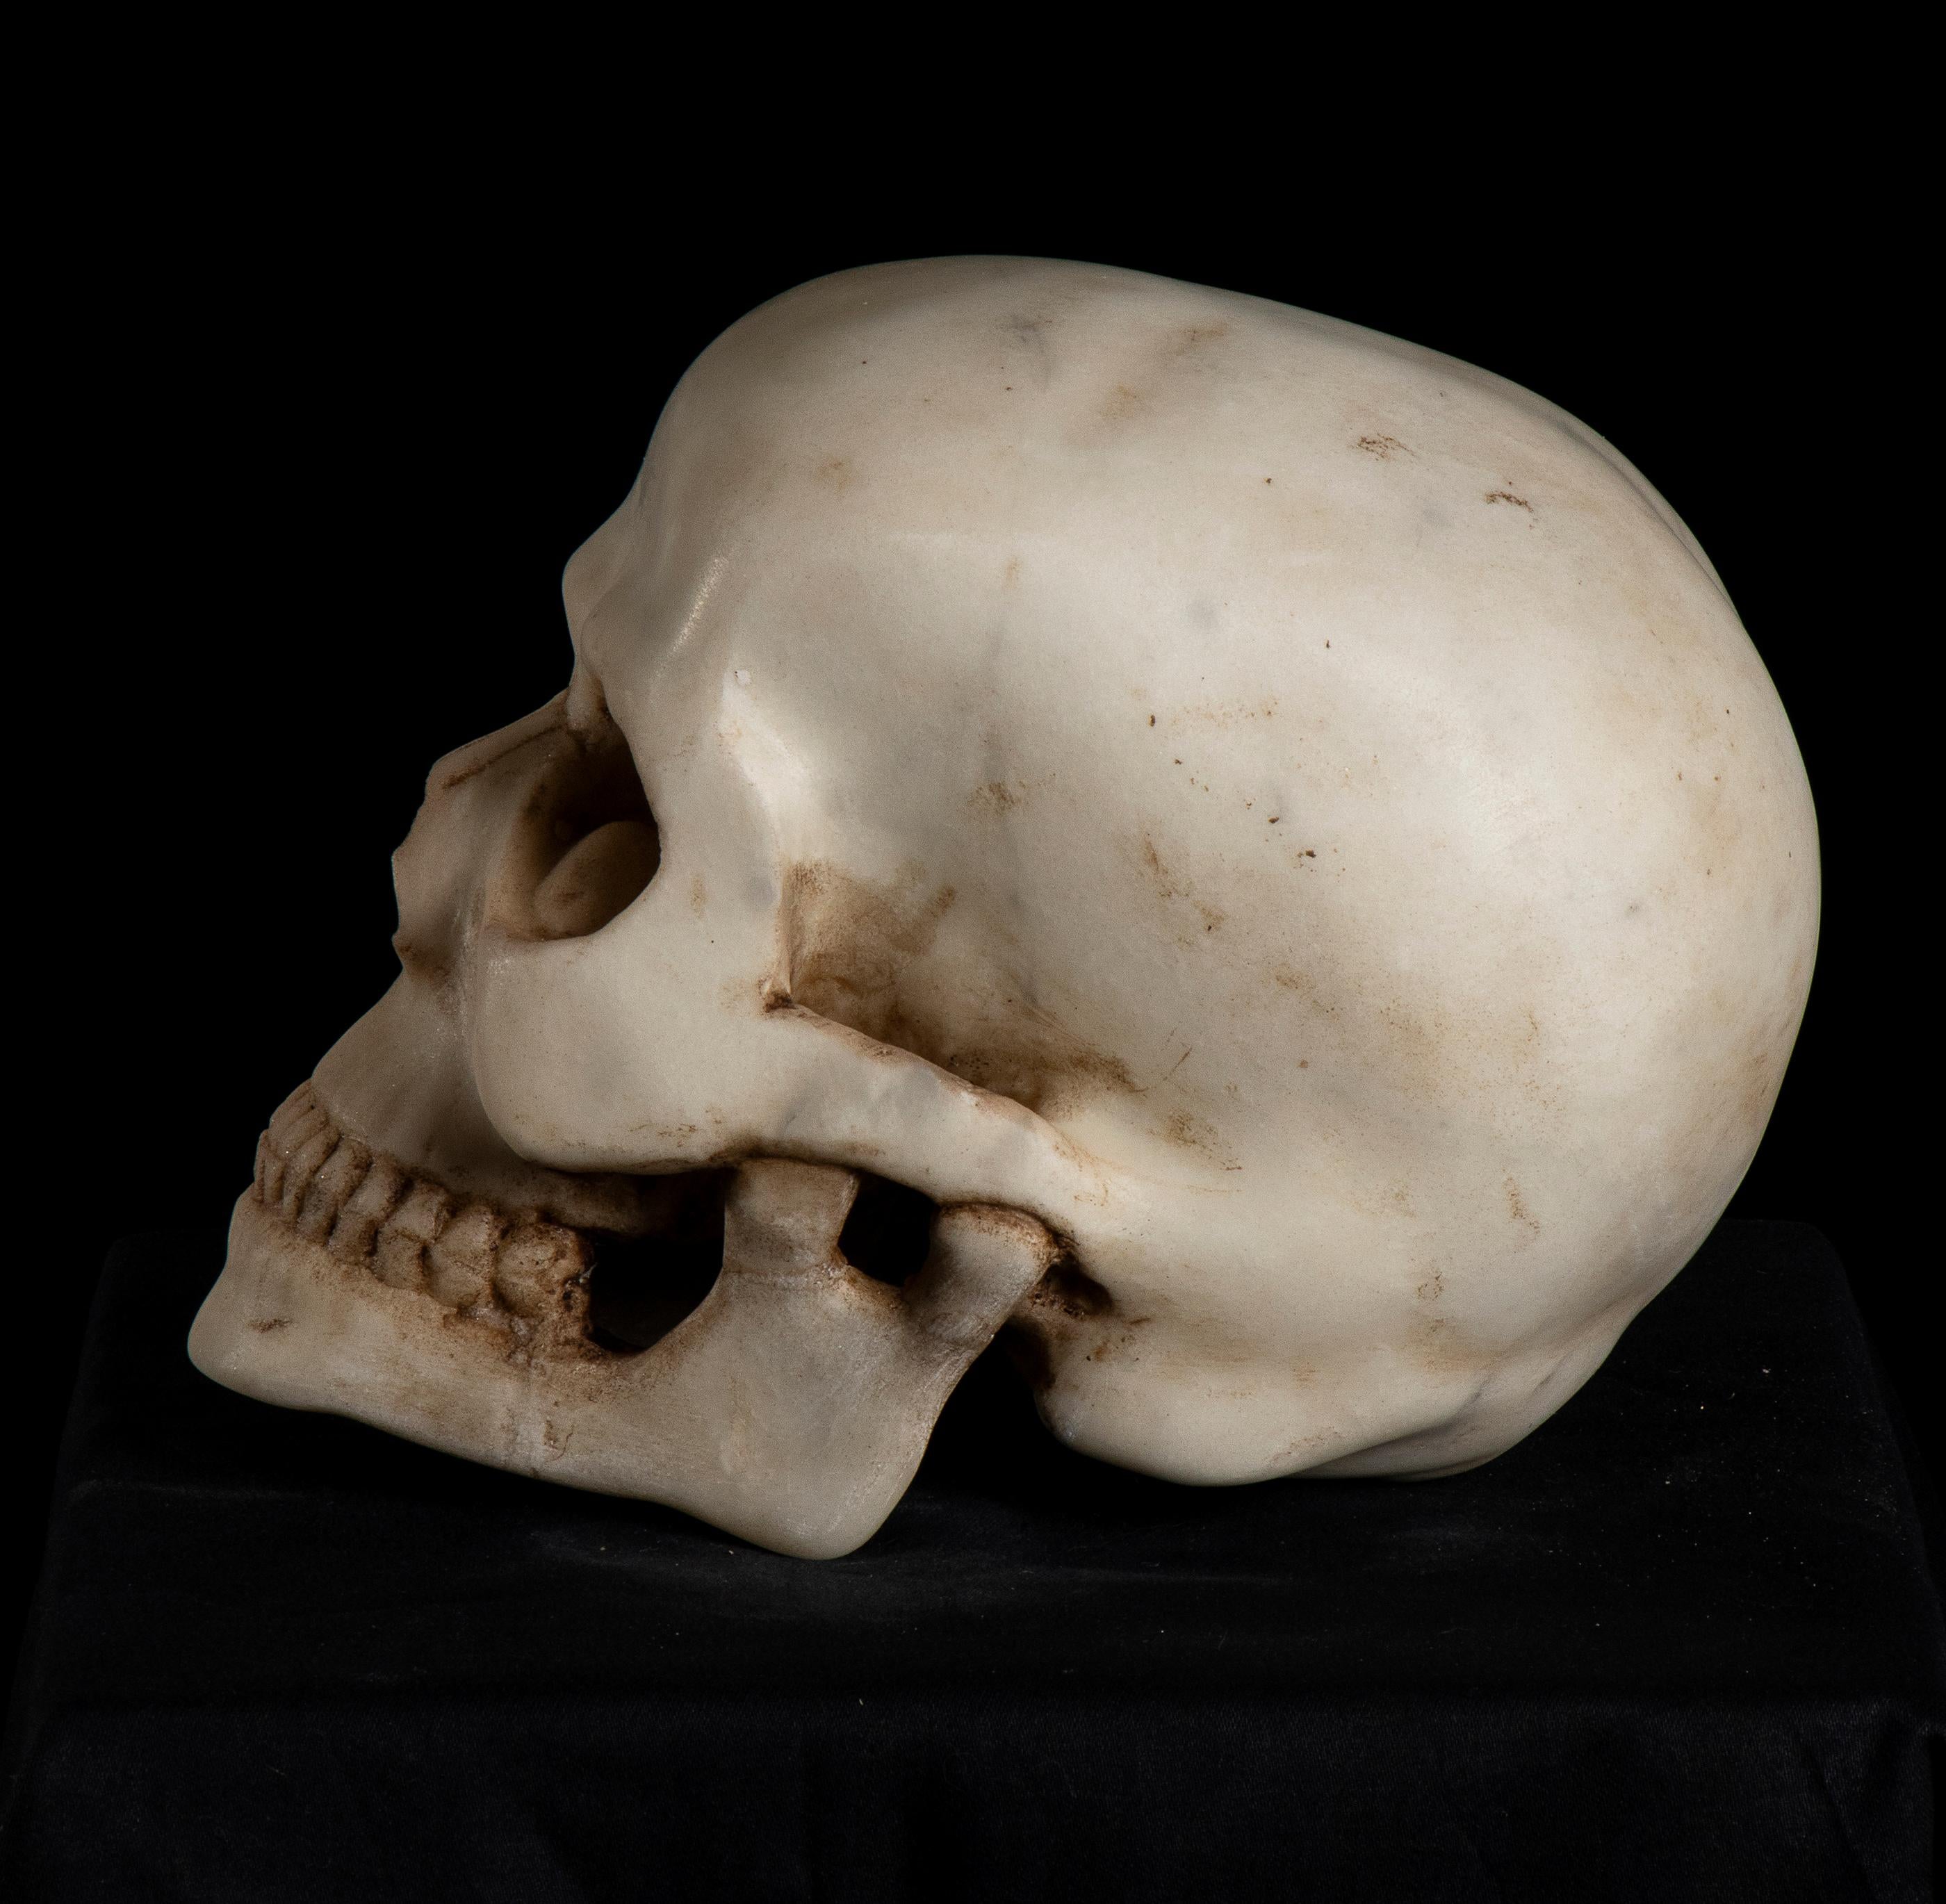 19th Century, White Marble Sculpture A Depiction of Vanitas, Skull Memento Mori  - Black Nude Sculpture by Unknown